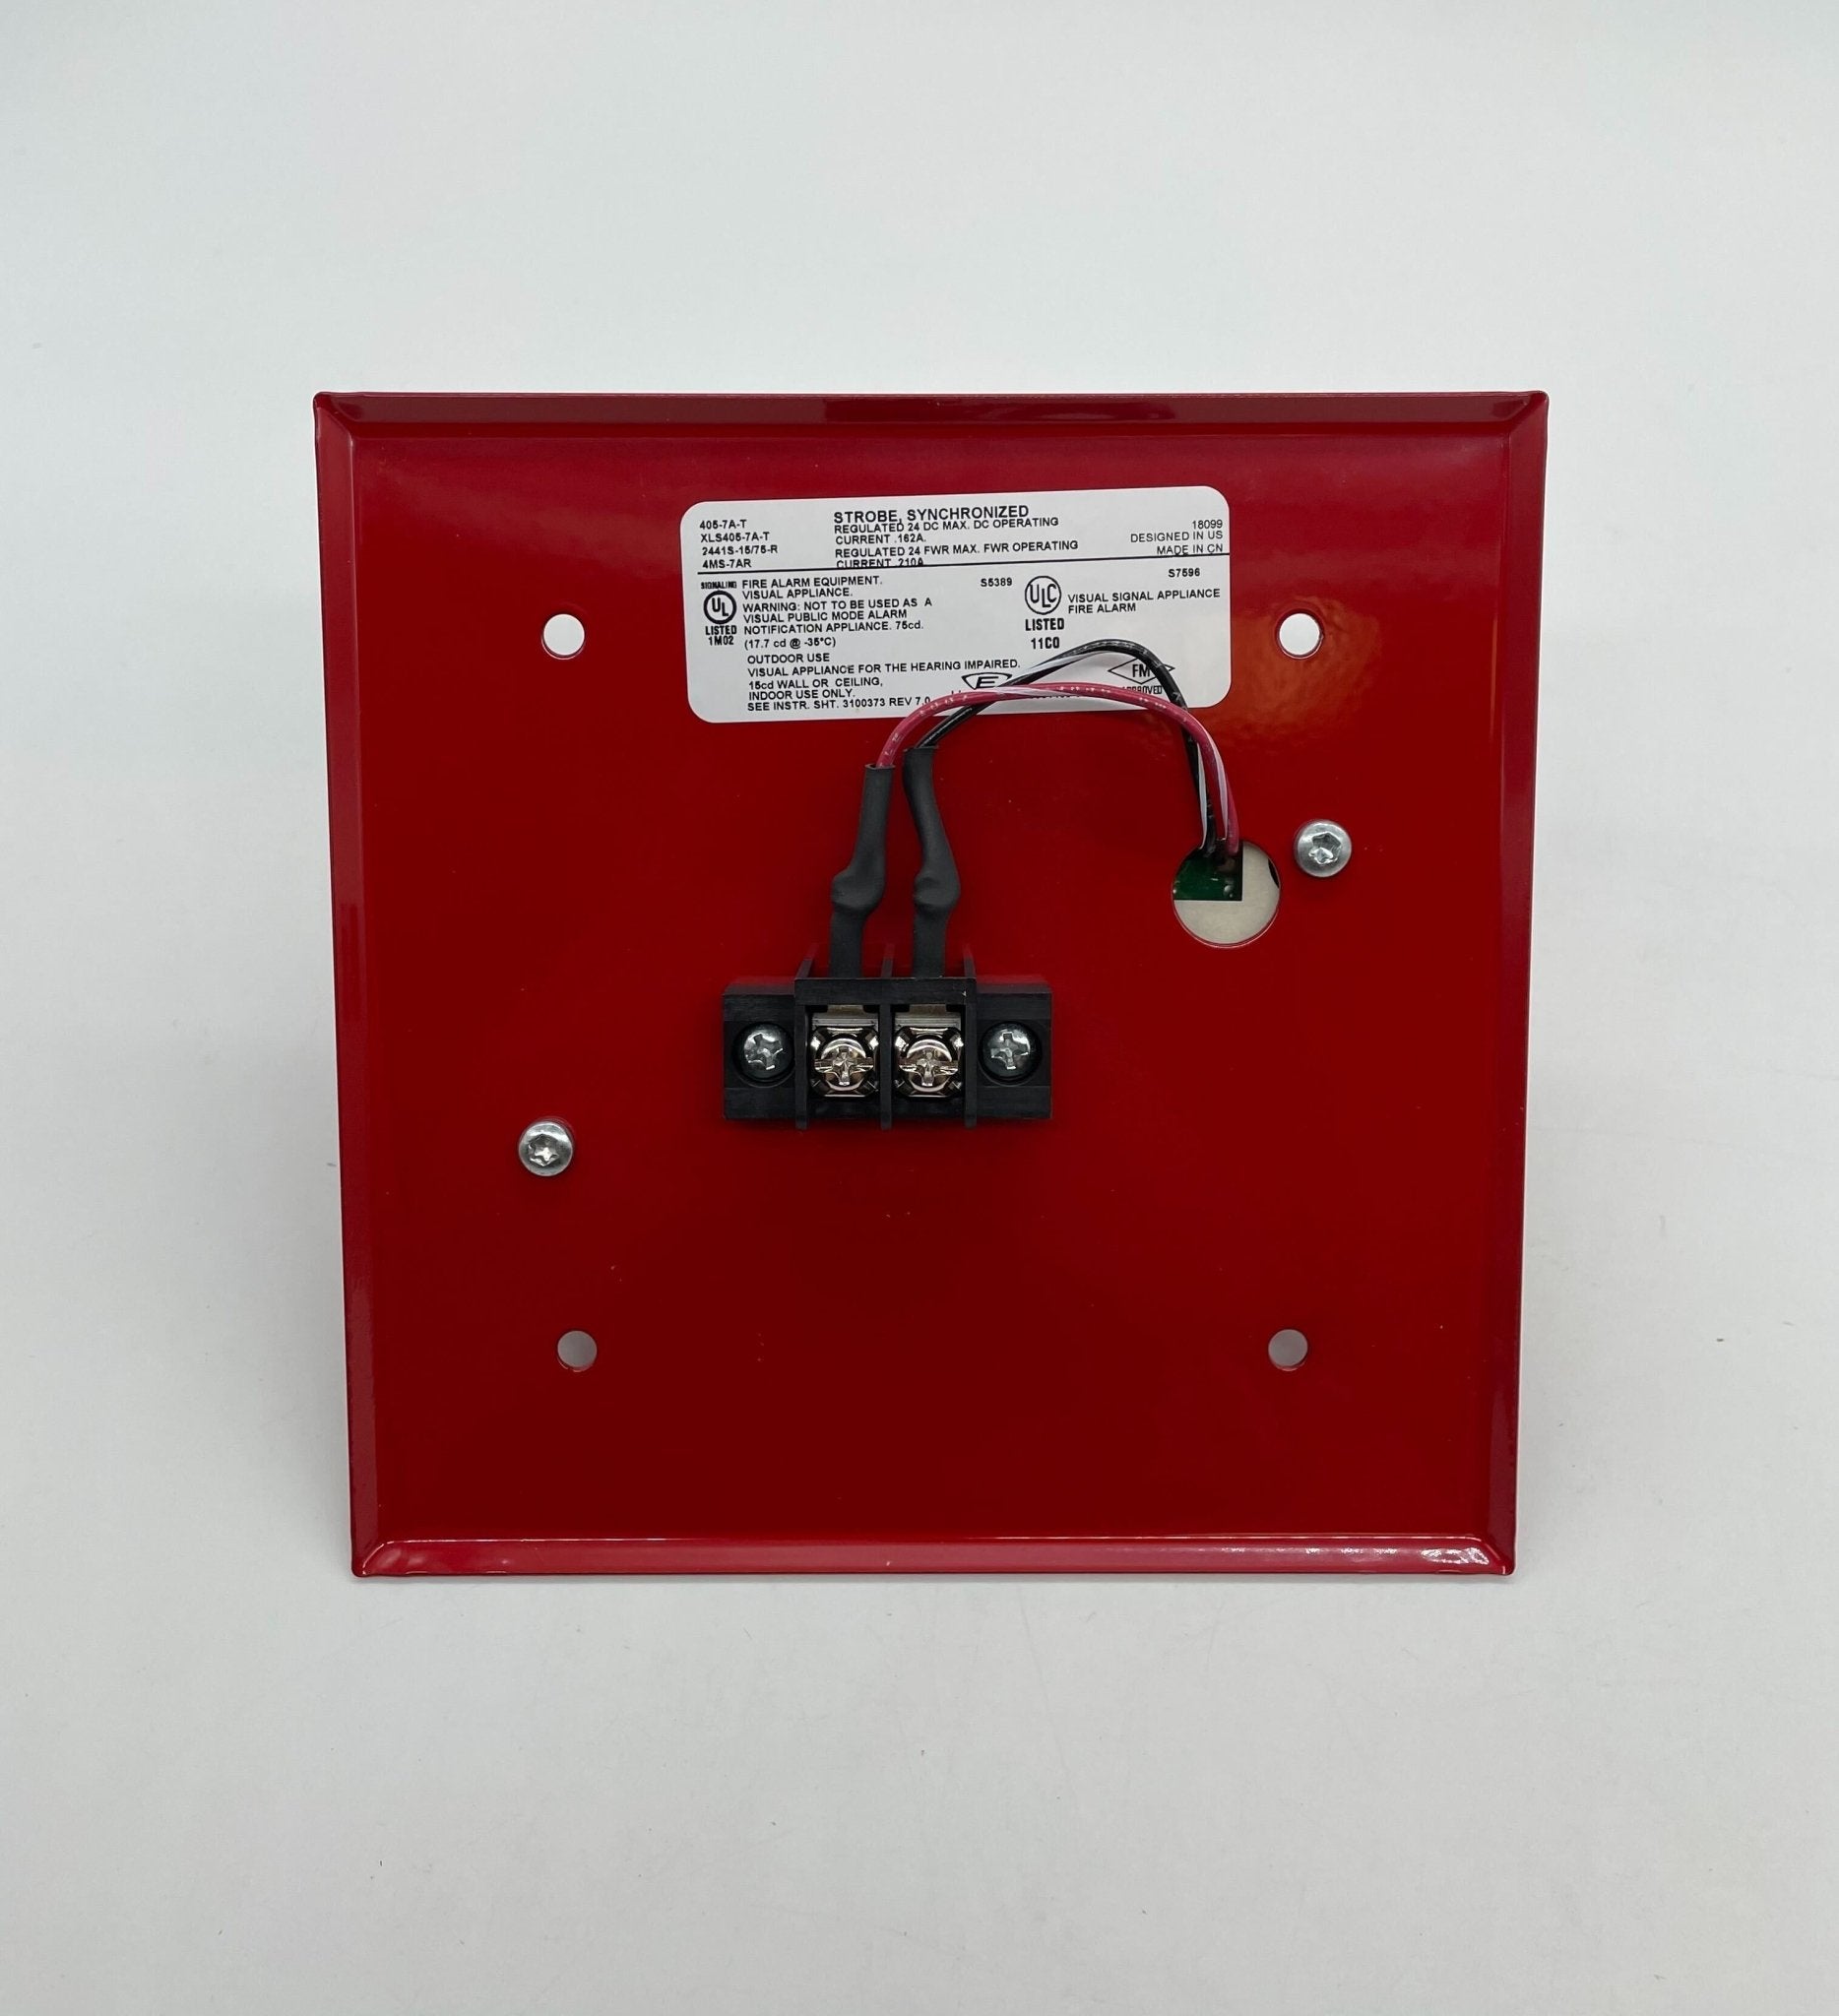 Edwards 405-7A-T - The Fire Alarm Supplier